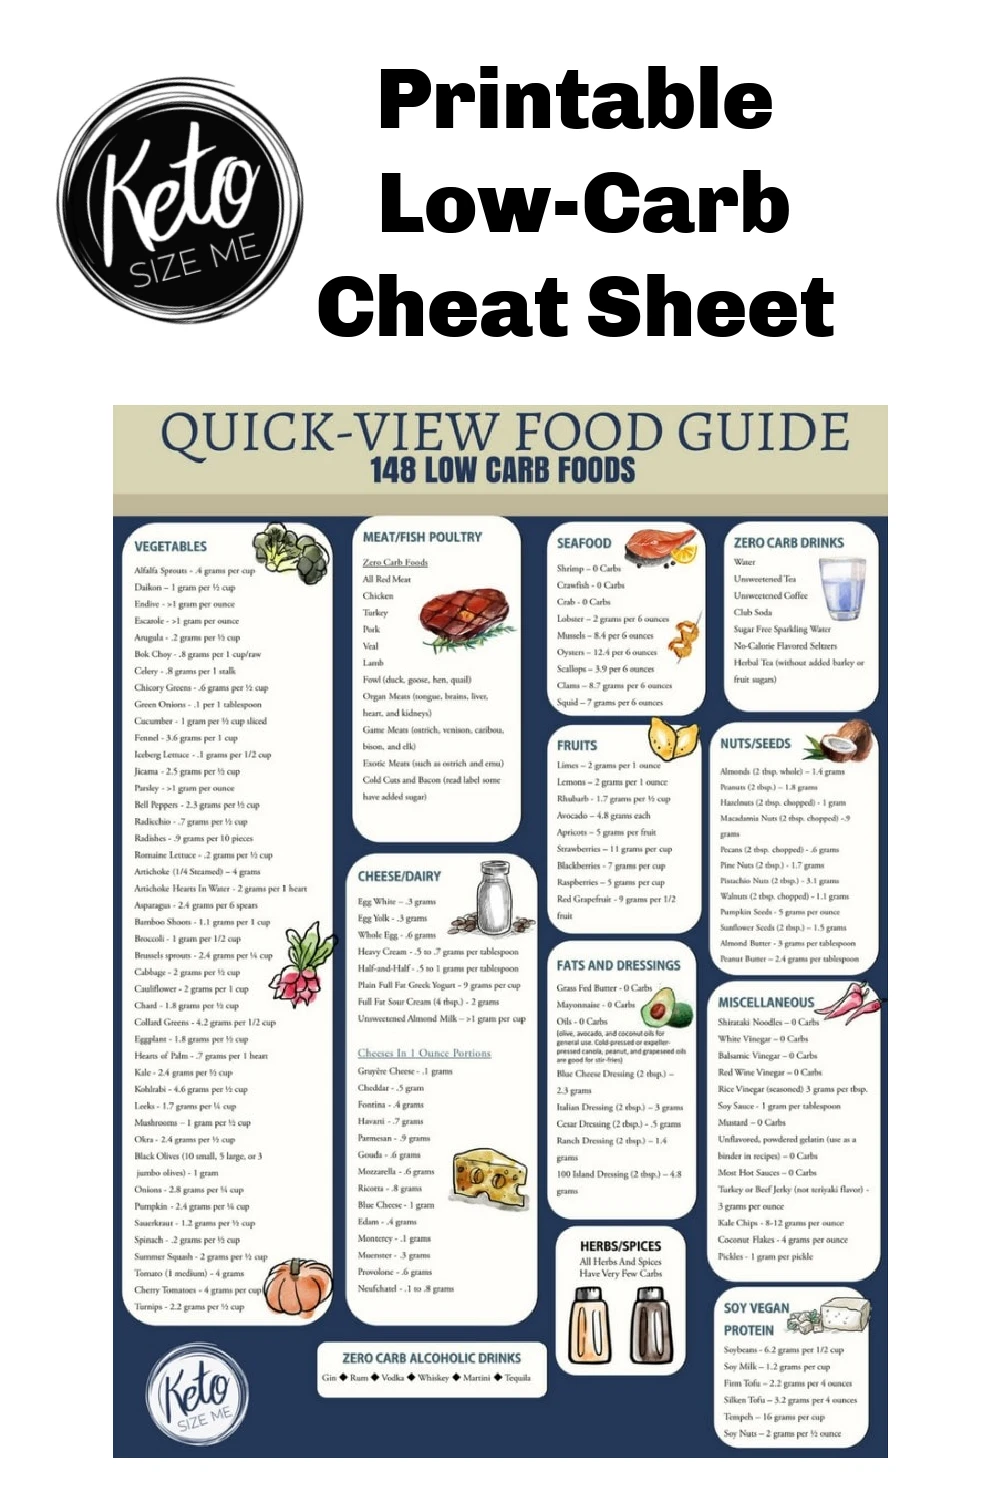 cheat sheet chart for the keto diet that lists foods and their net carb counts